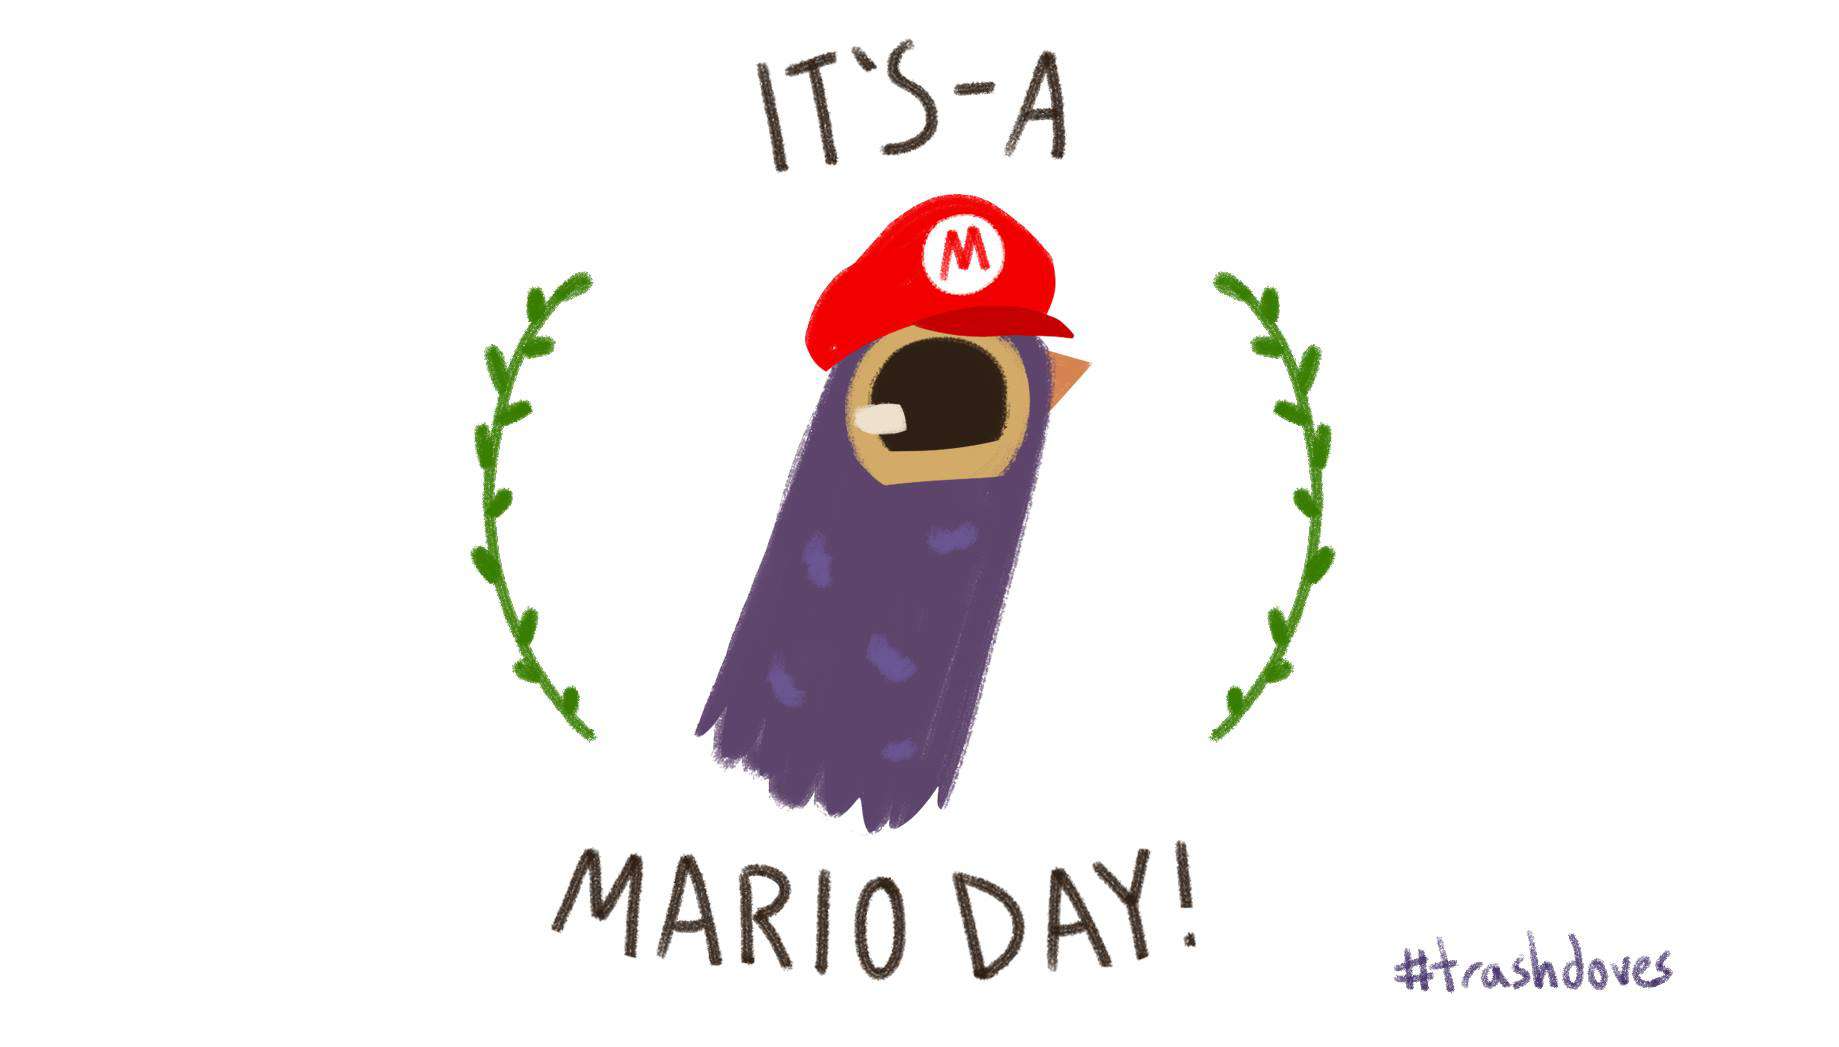 Mario Day Wishes pics free download